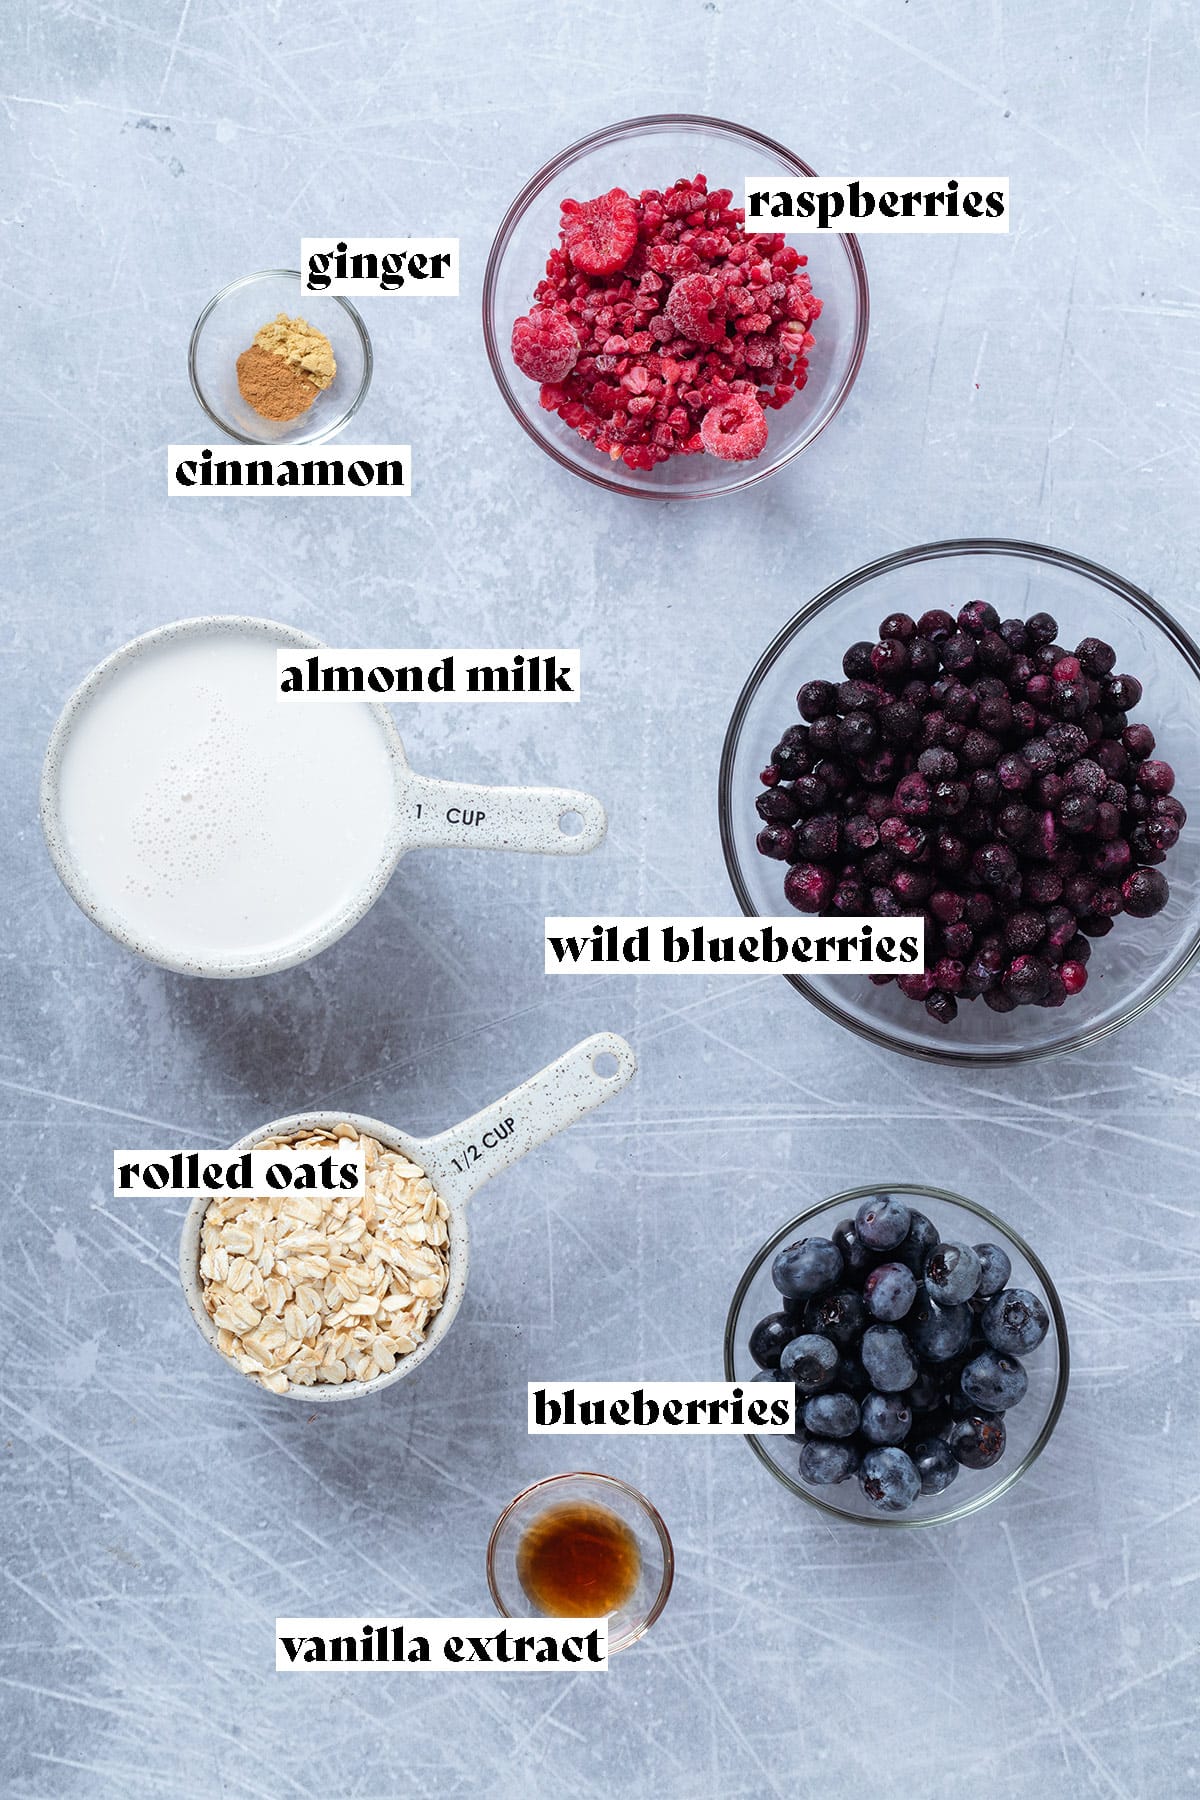 Ingredients for blueberry oatmeal laid out on a grey background.